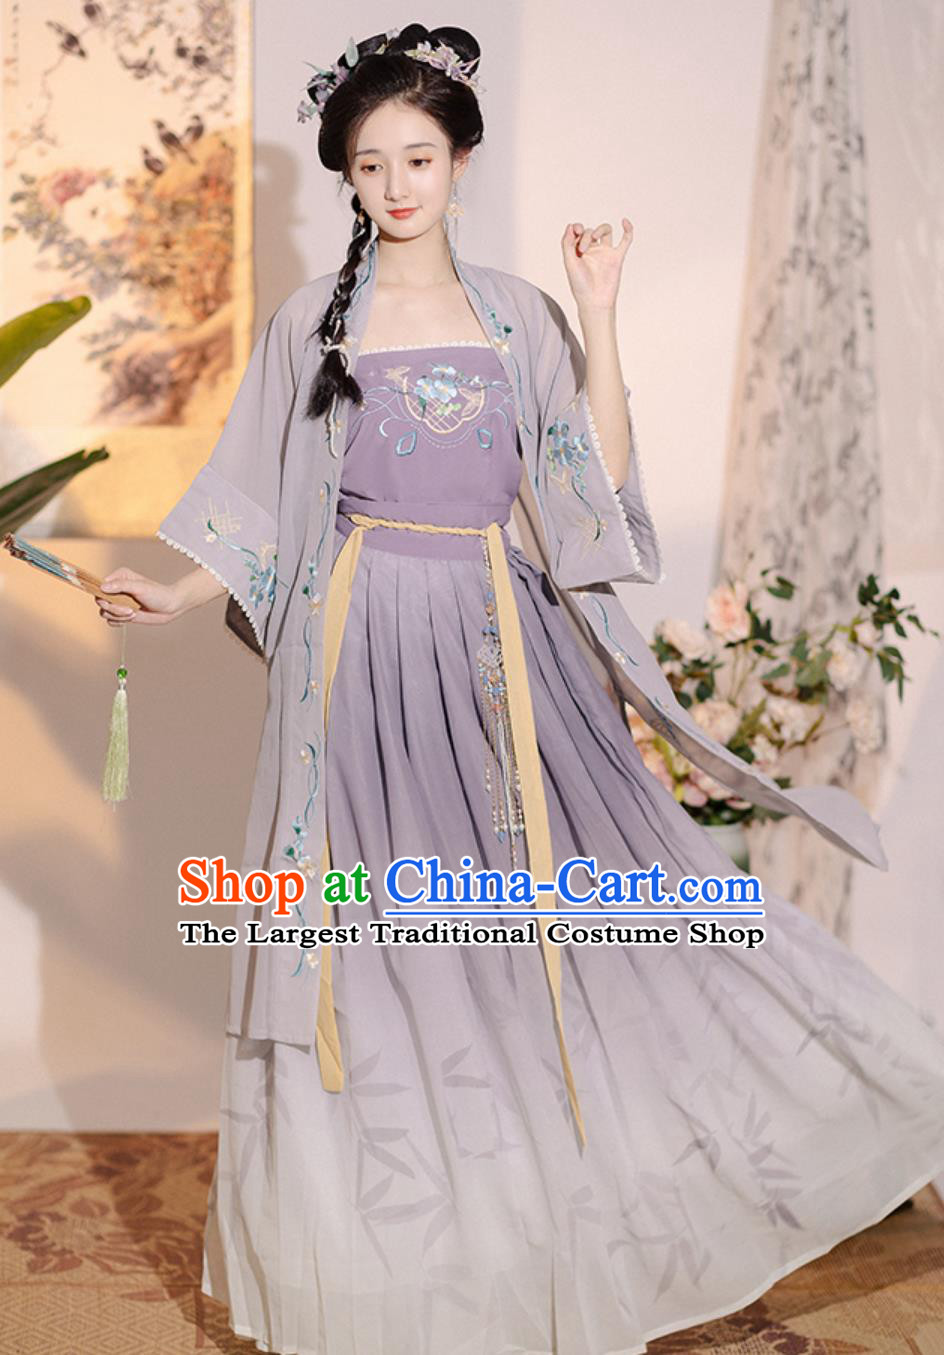 Ancient Chinese Clothing China Song Dynasty Young Woman Costume Traditional Hanfu Embroidered Purple Outfit